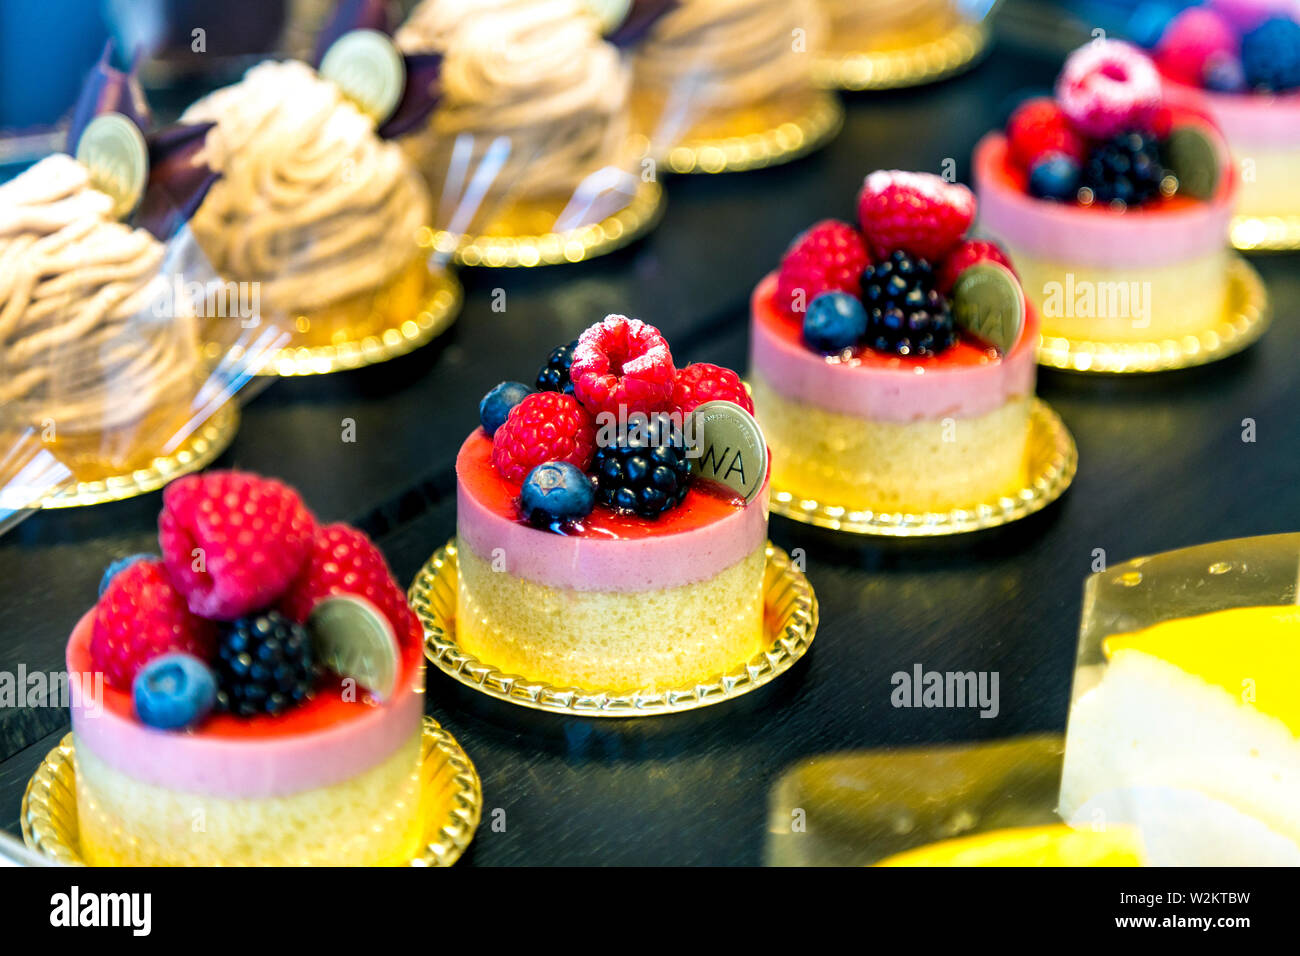 Raspberry mousse, cakes and desserts at Japanese WA Cafe and patisserie, Ealing Broadway, London, UK Stock Photo